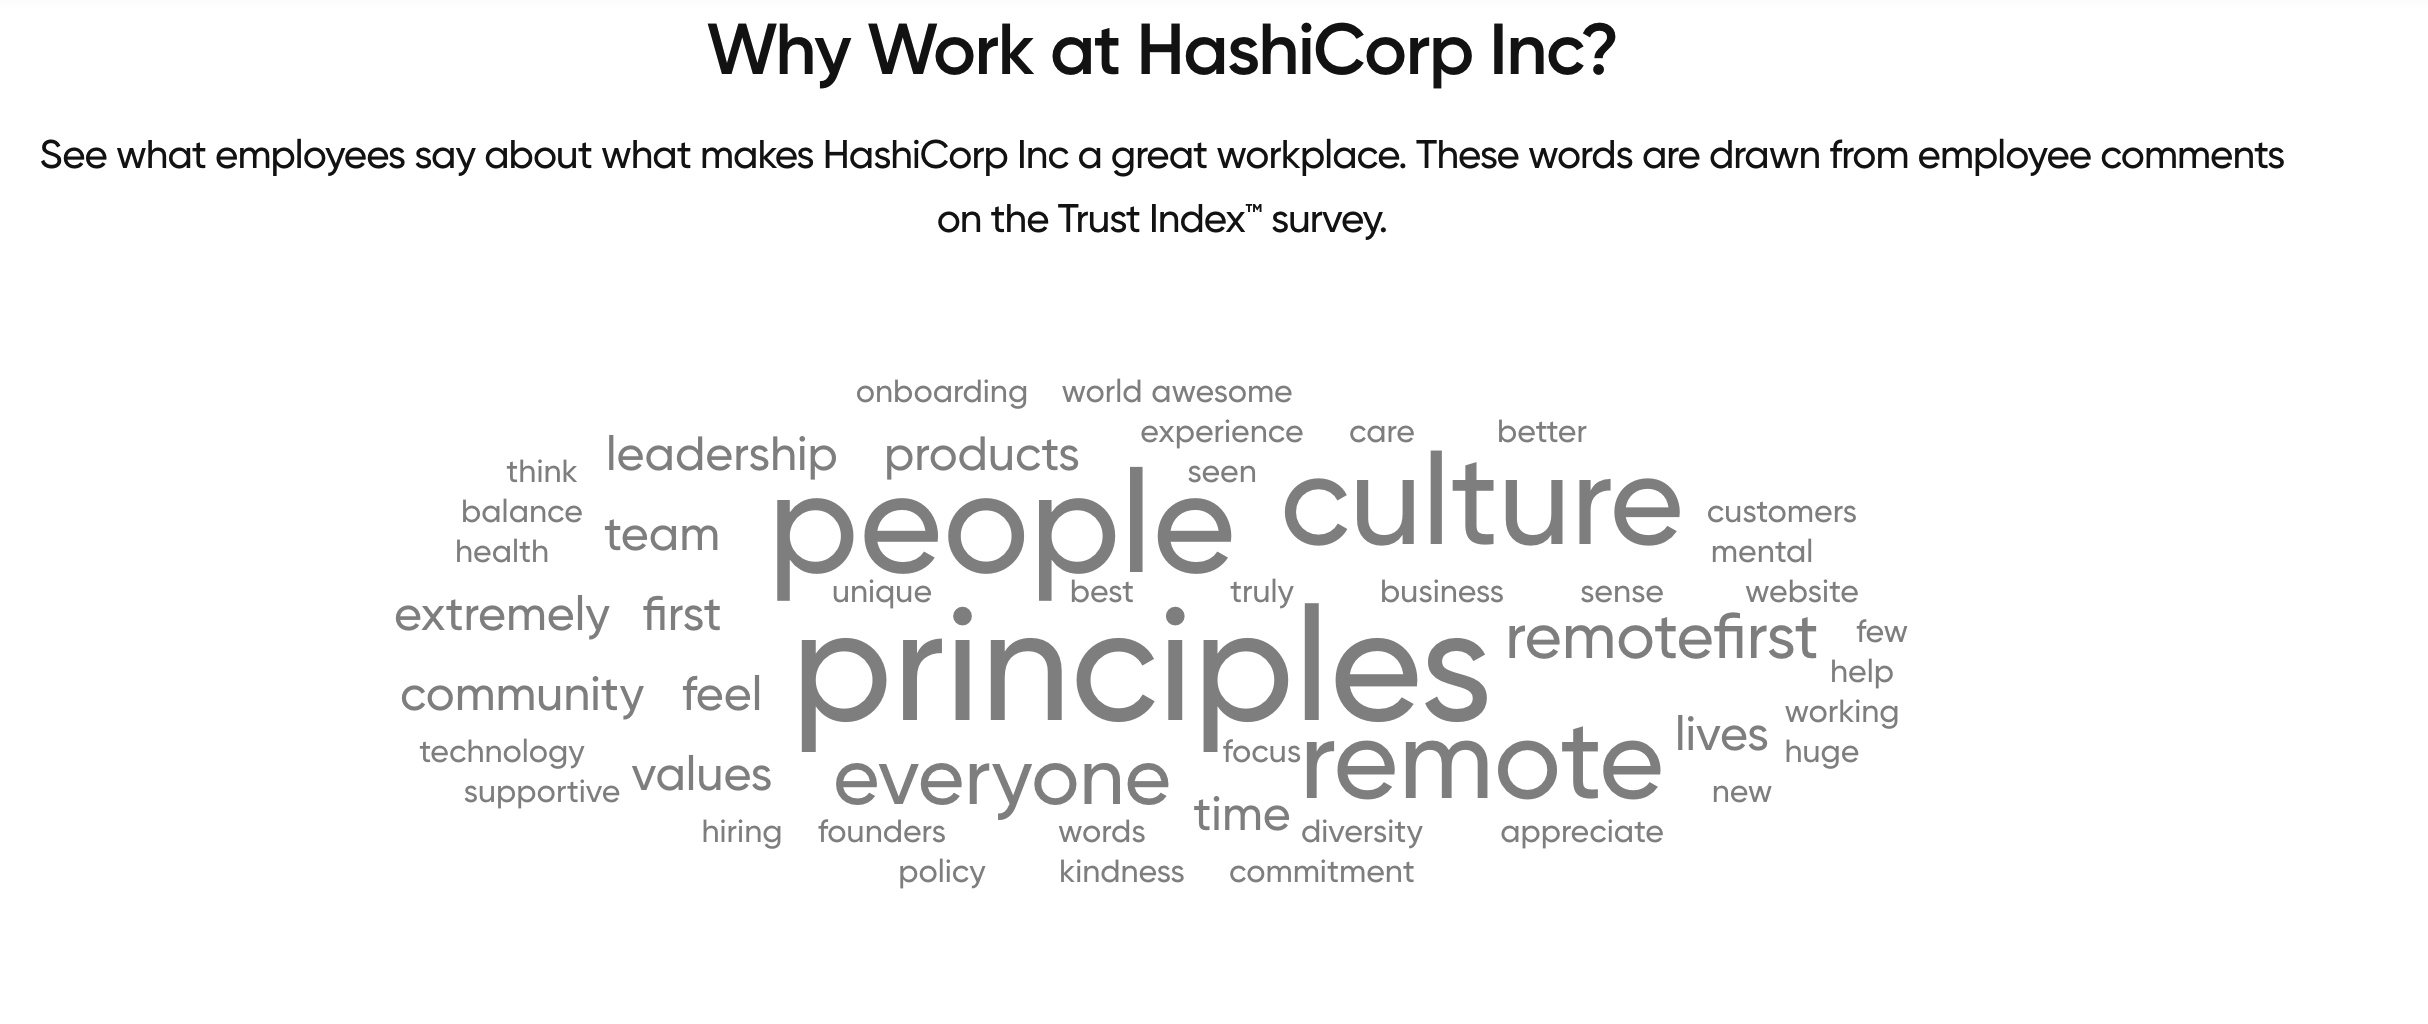 Why Work at HashiCorp employee responses